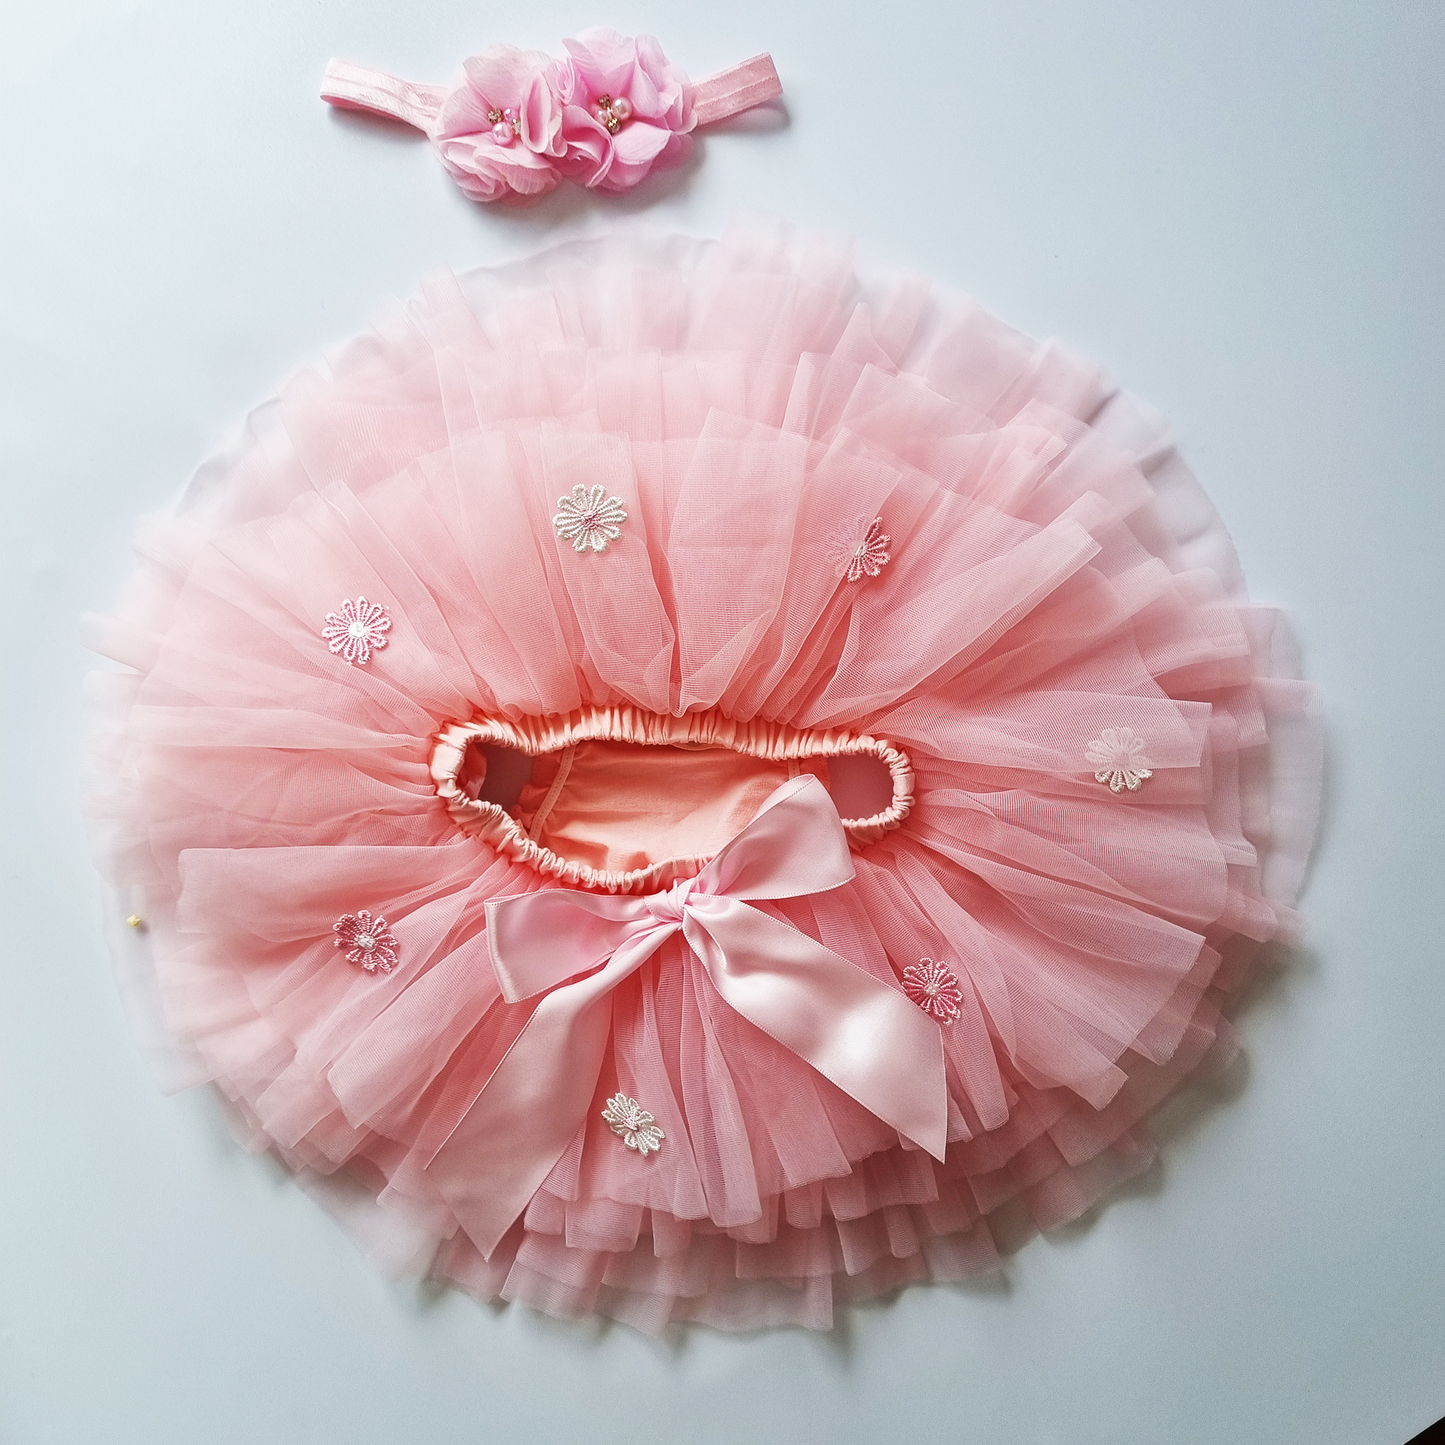 Baby Pink Soft Layered Tutu Skirt with Embroidered flowers and Headband Set